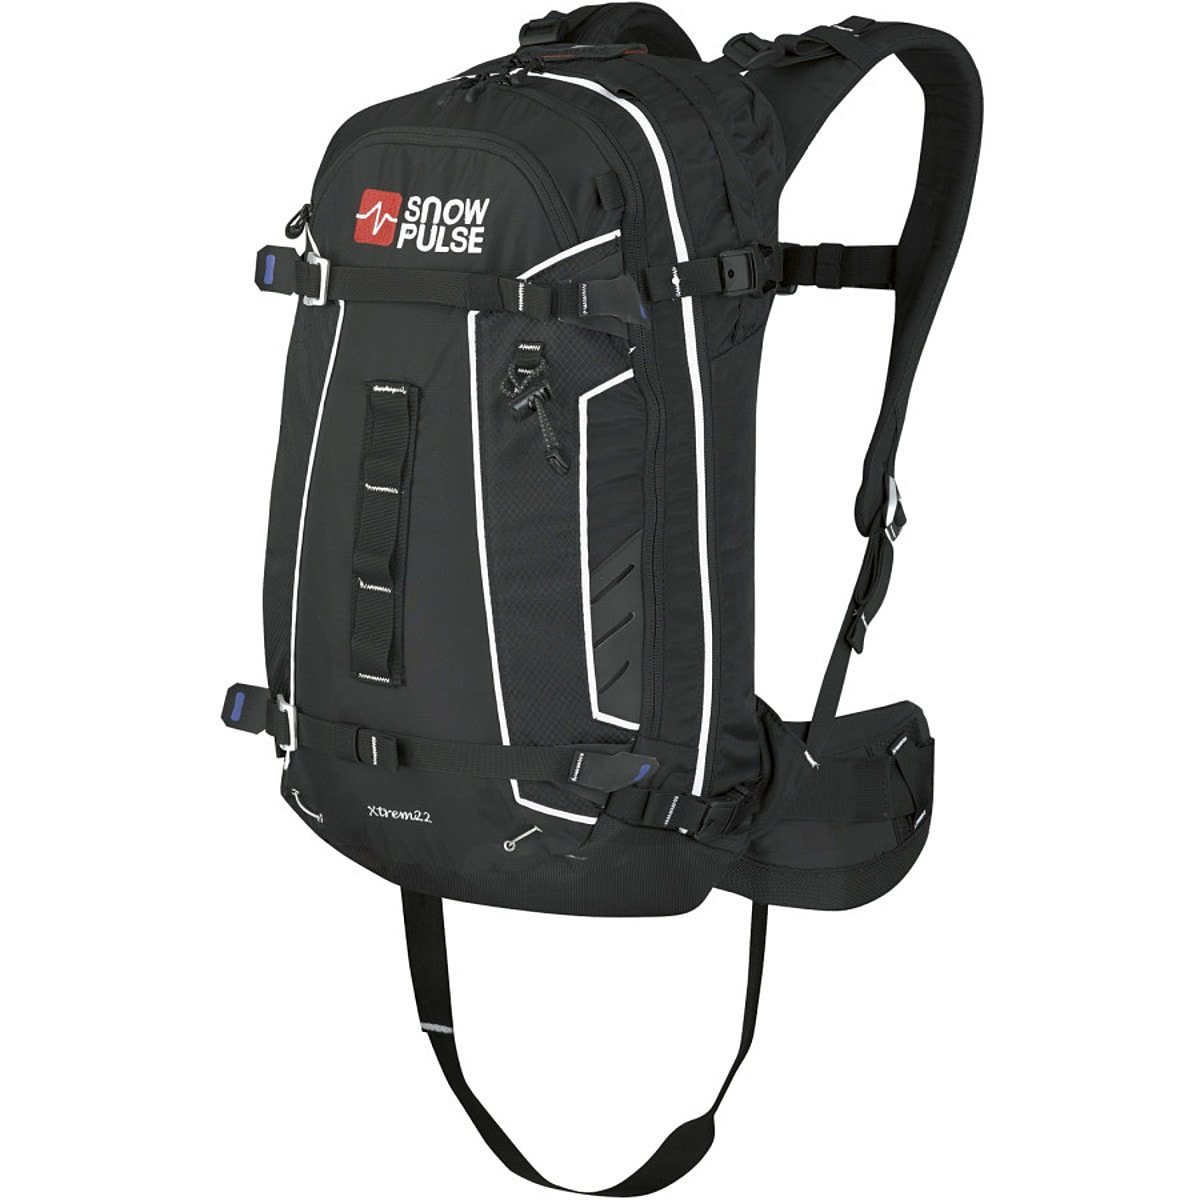 applaus kiespijn Trouw Snowpulse Extreme 22 Backpack with Removable Airbag System - Ski